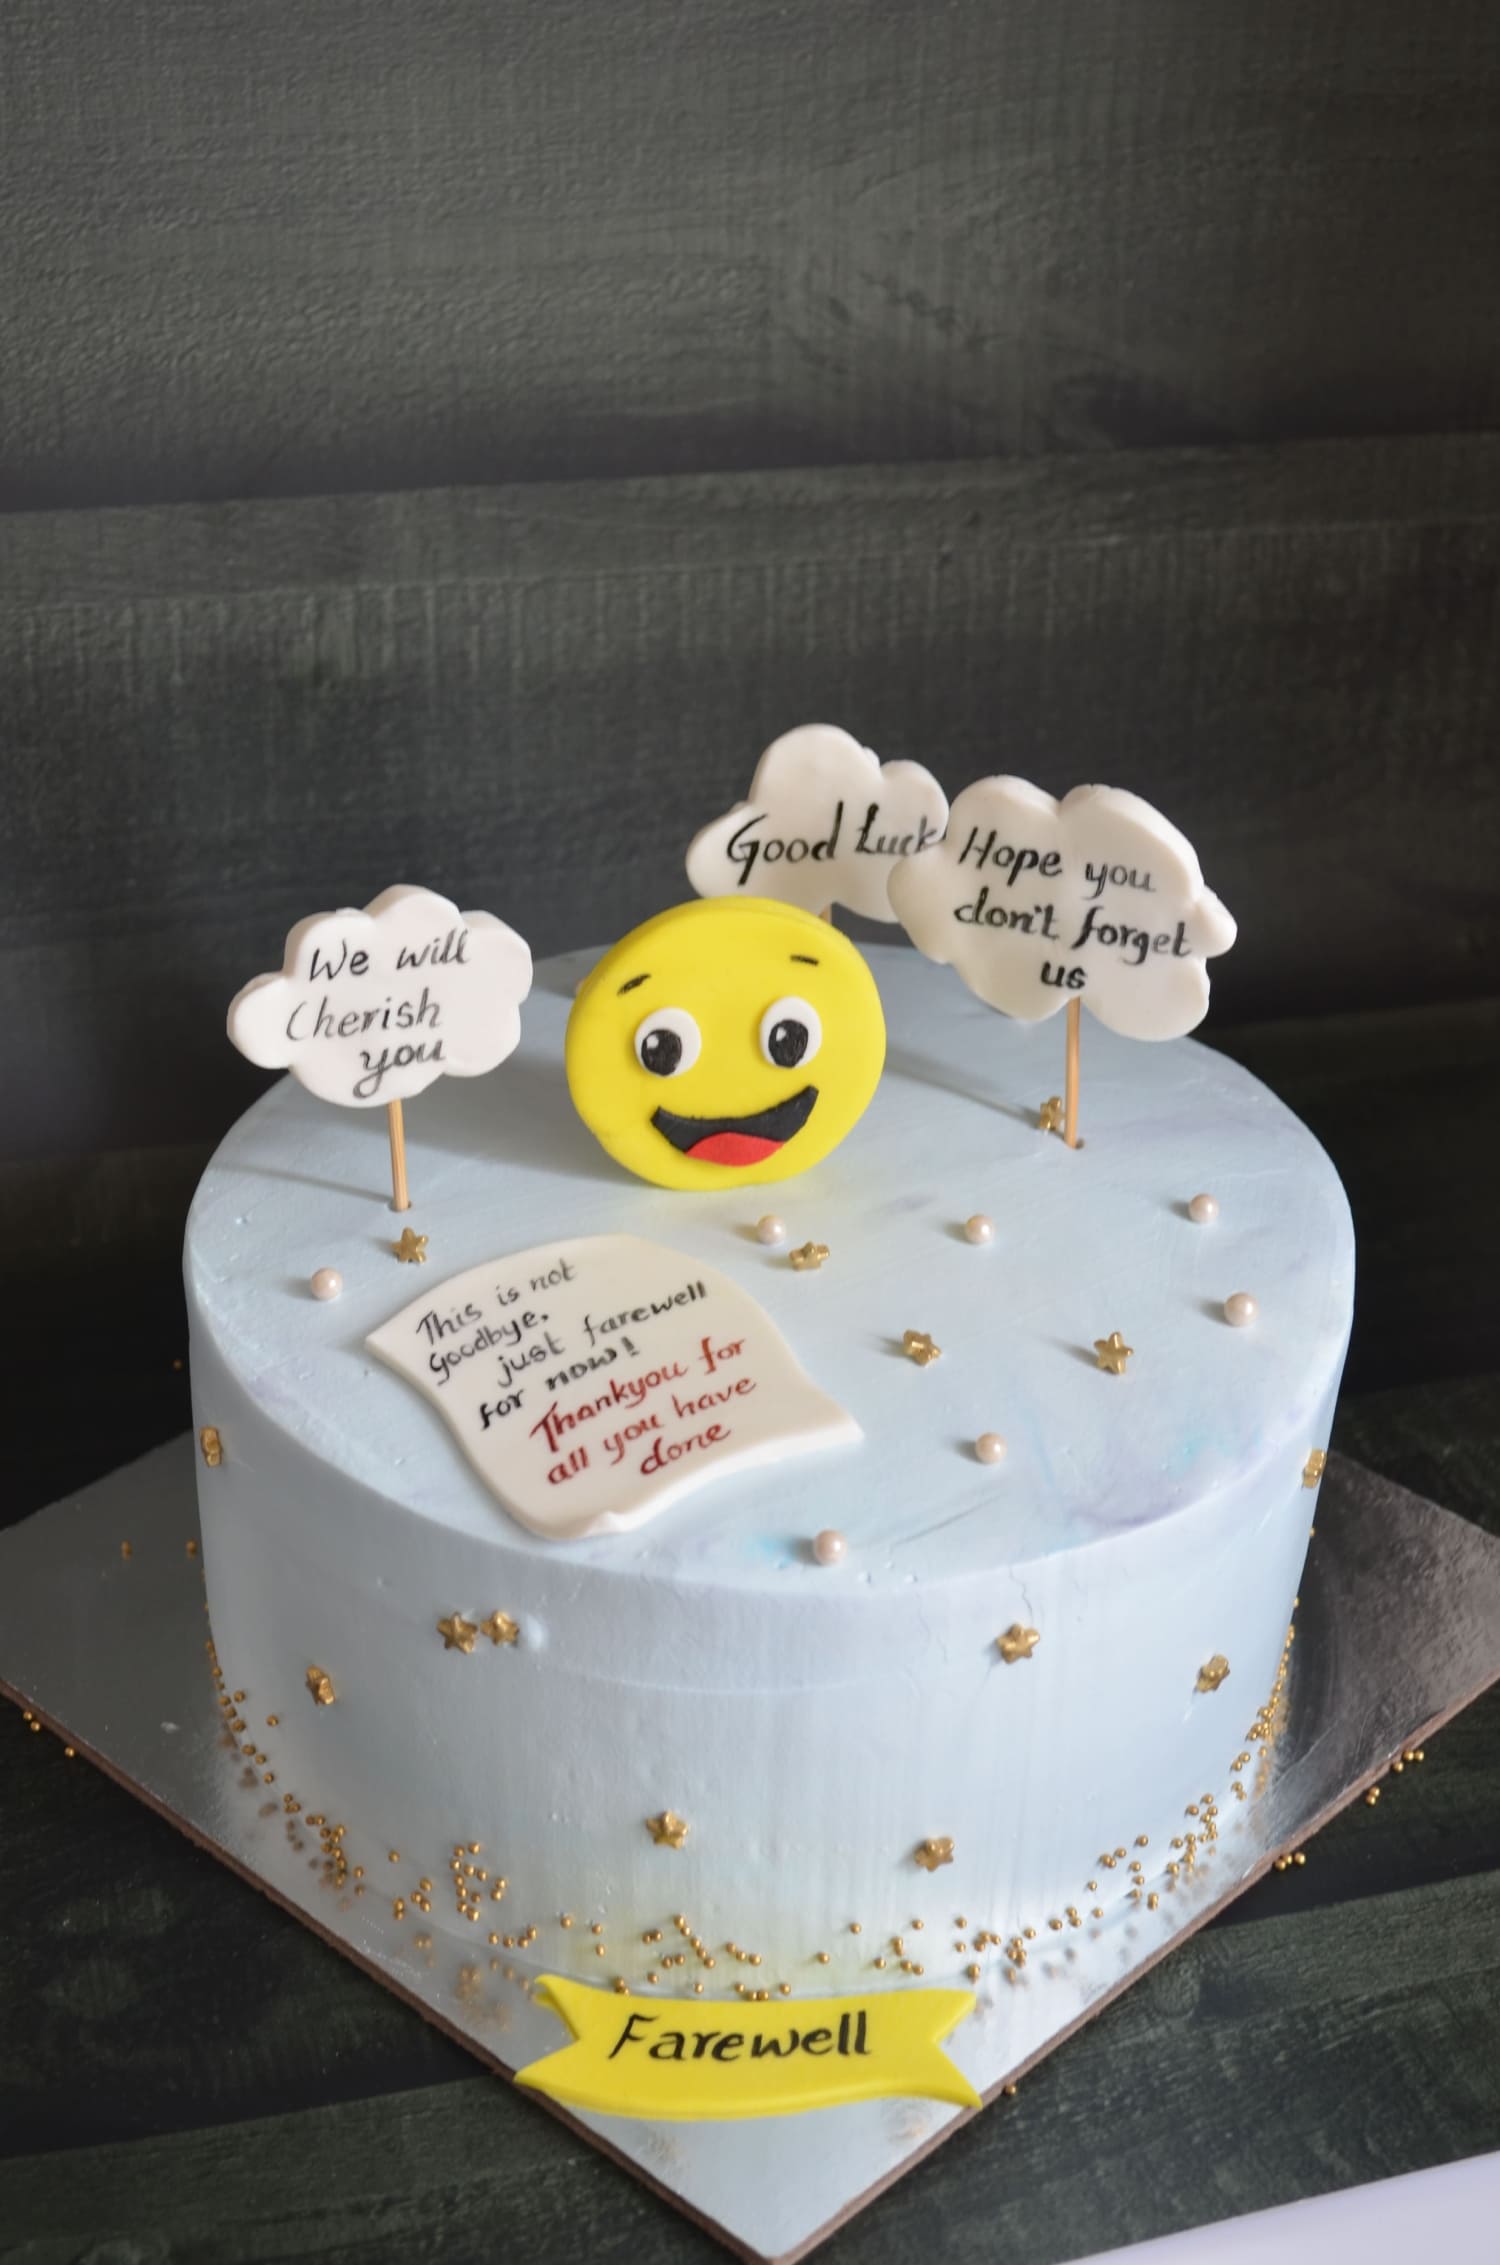 30 Funny Farewell Cakes That Employees Received On Their Final Day Of Work